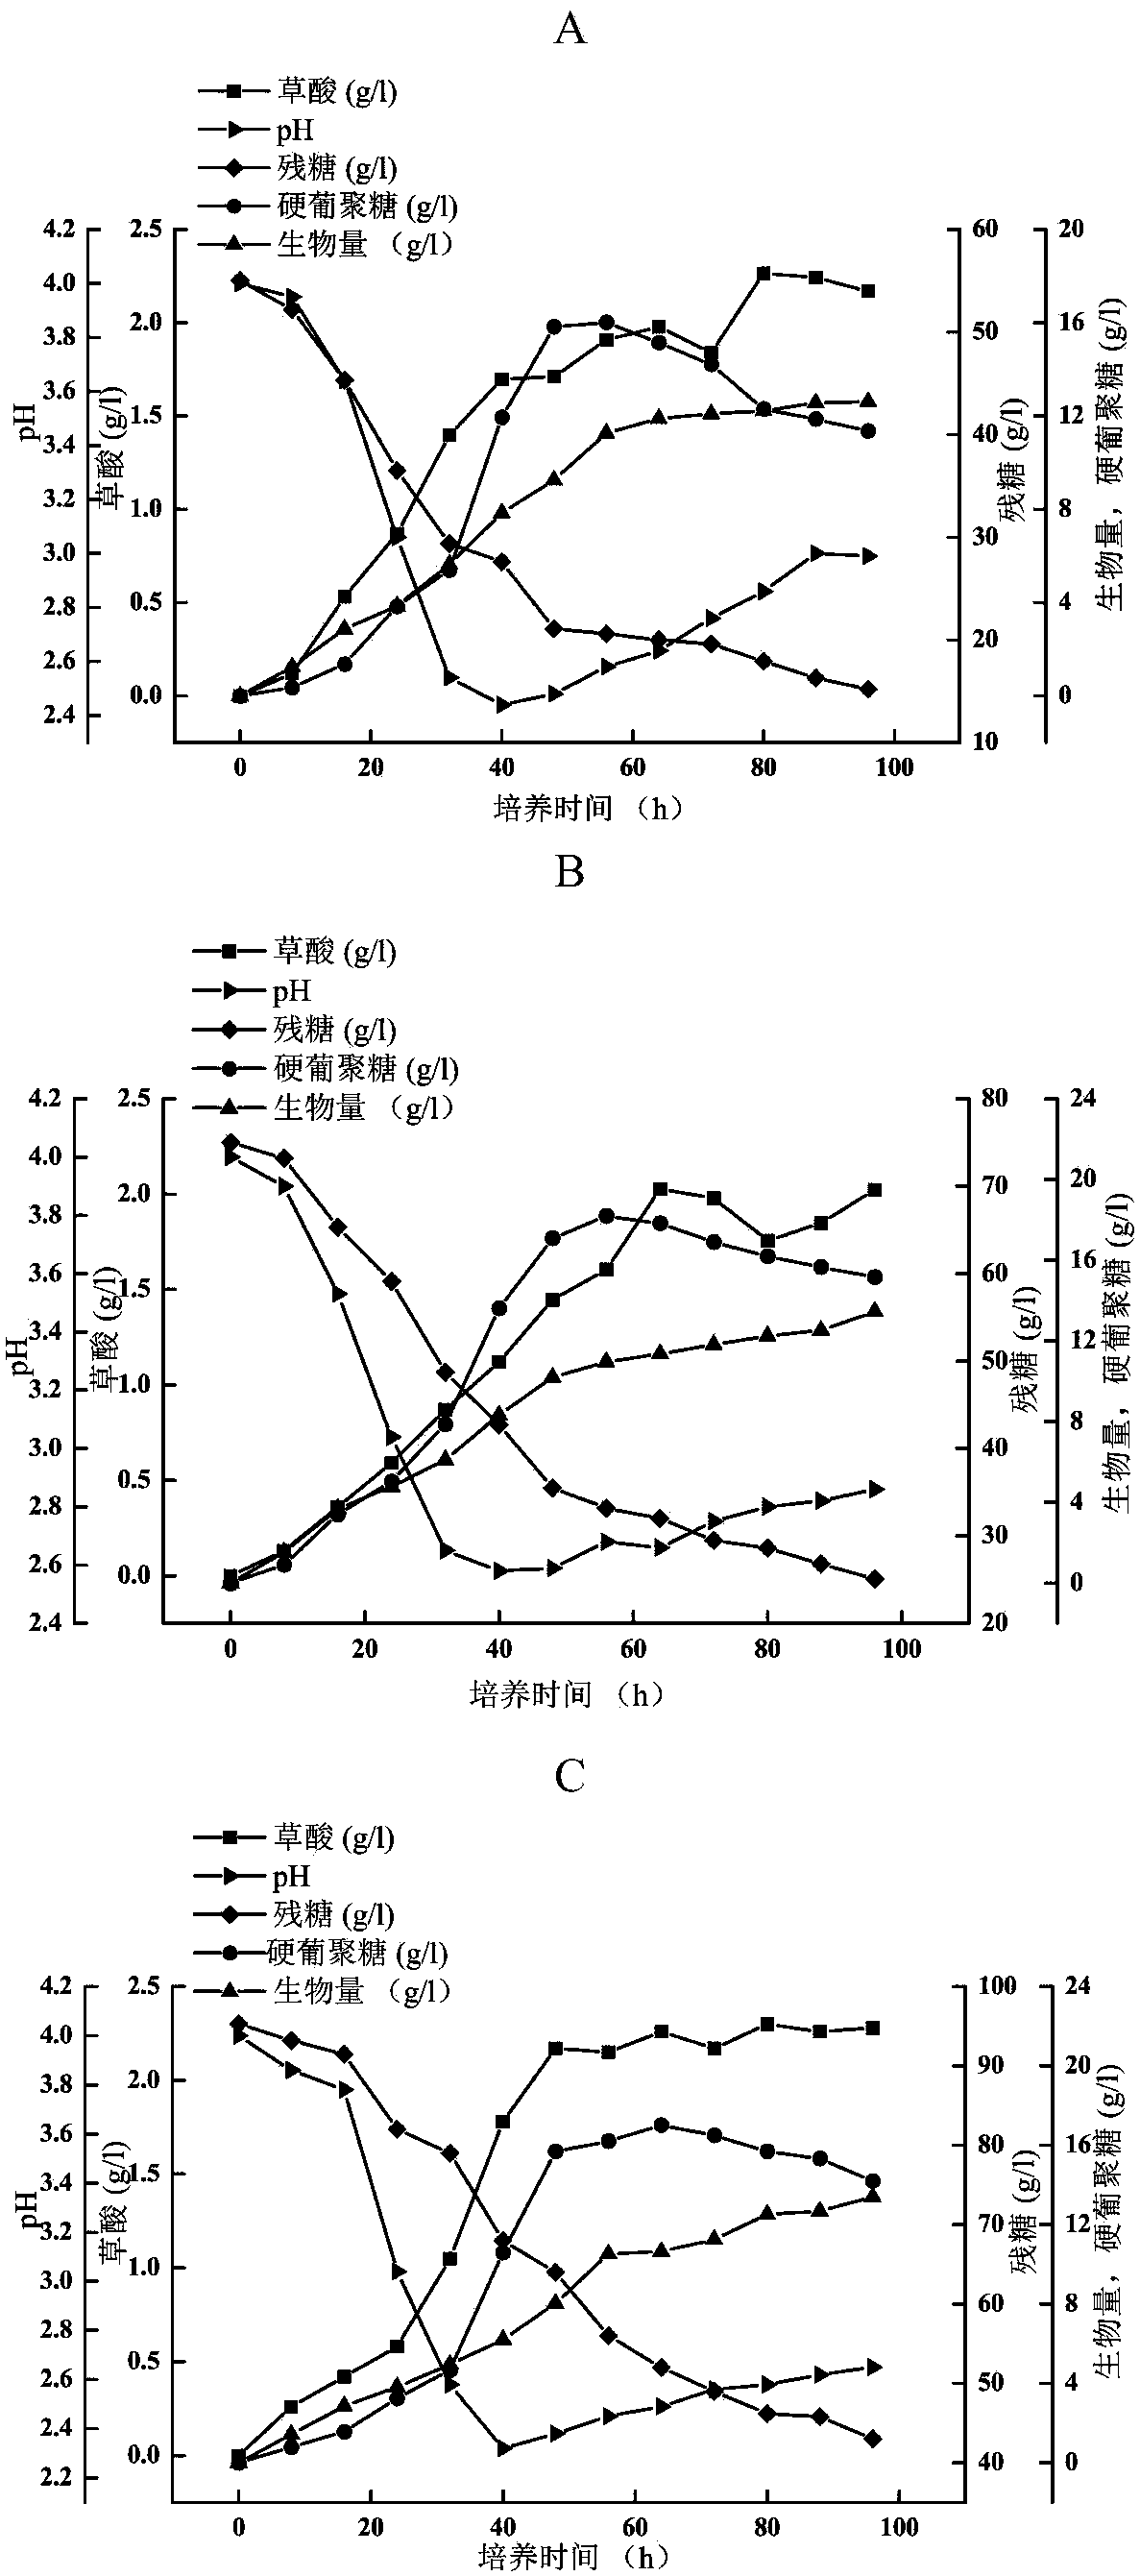 (Sclerotium rolfsii)WSH-G01 and method for producing scleroglucan by fermenting (Sclerotium rolfsii)WSH-G01